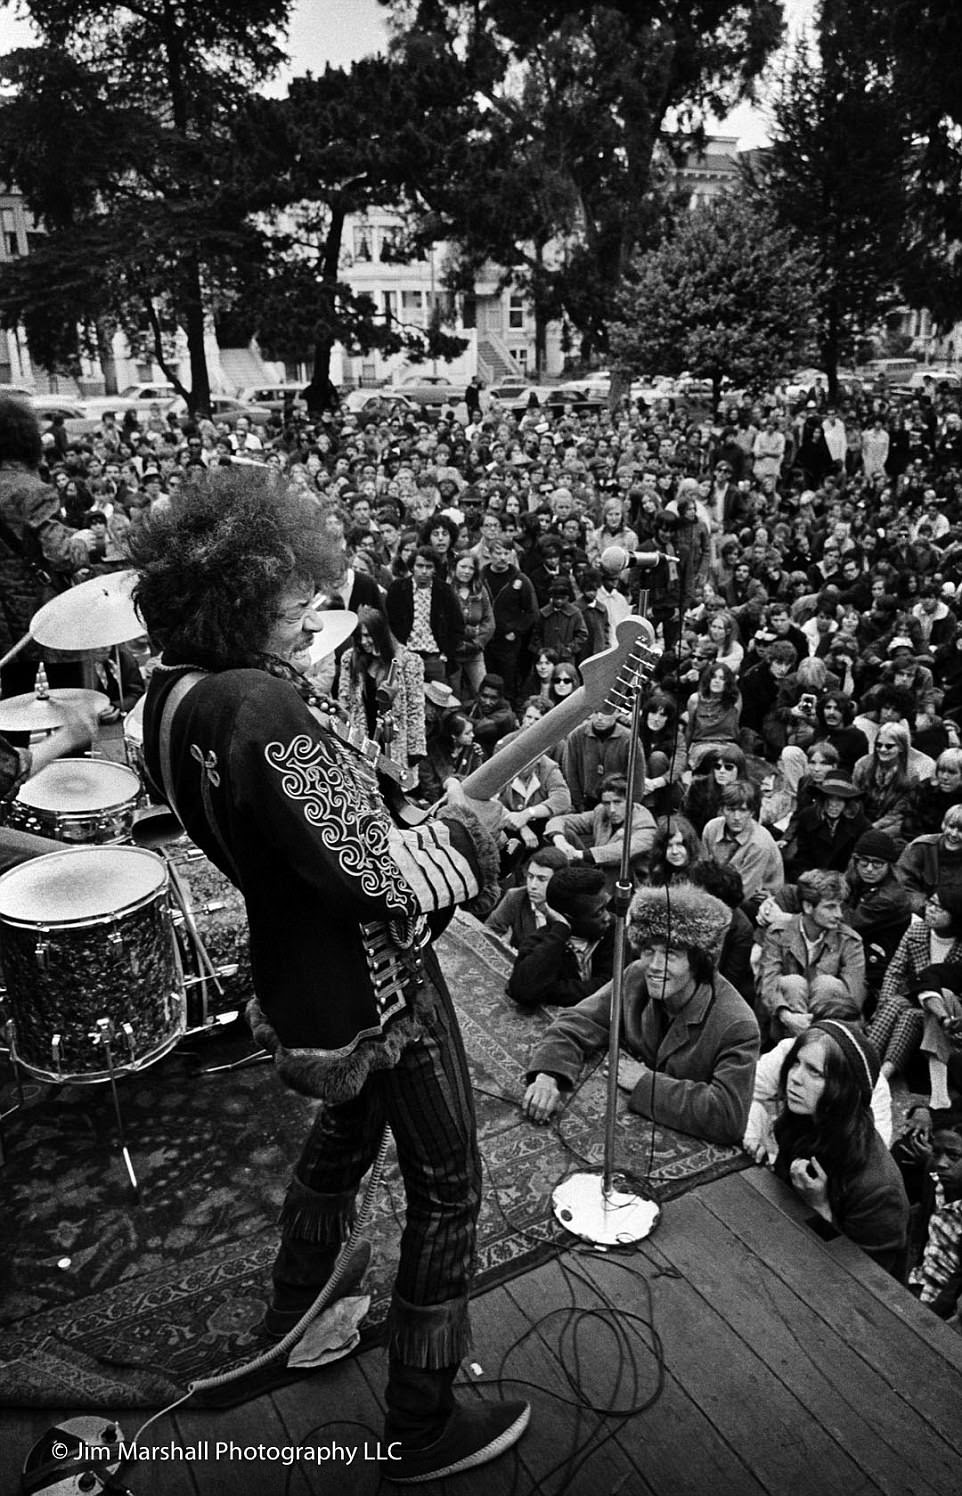 Jimi Hendrix performs at a free concert in the Panhandle park in San Francisco on June 19, 1967, for crowds that had gathered from across the country to share liberal ideas, listen to music, protest the Vietnam War and experiment with drugs. Photographer Jim Marshall would capture another iconic image of Hendrix the same 'Summer of Love' when the musician set his guitar alight during the Monterey Pop Festival